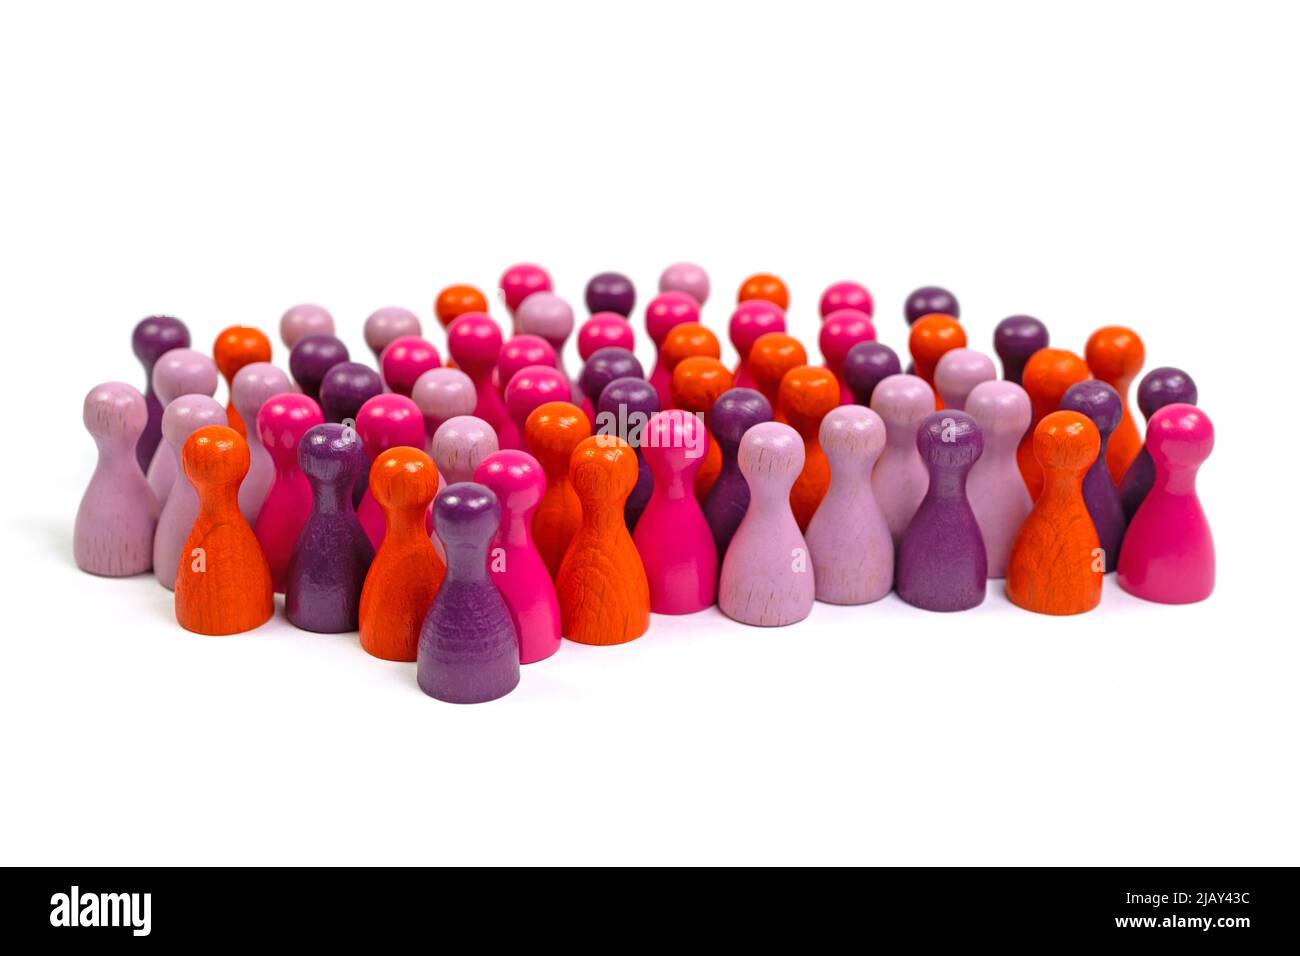 Many colorful wooden skittles, symbolic of people, in front of a white background Stock Photo